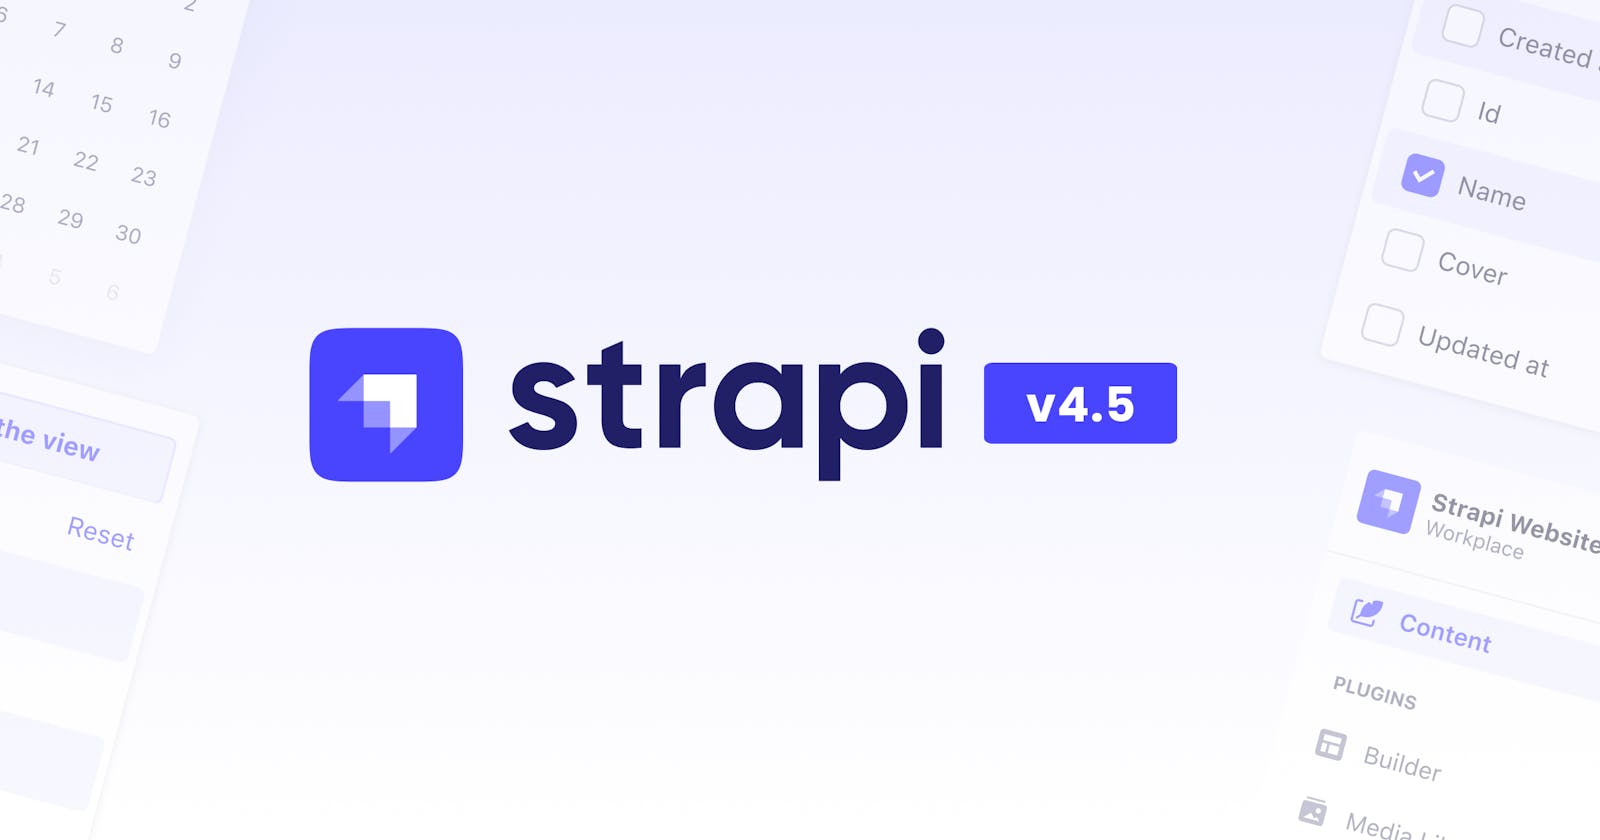 Strapi v4.5 is live with relations in main layout and marketplace improvement